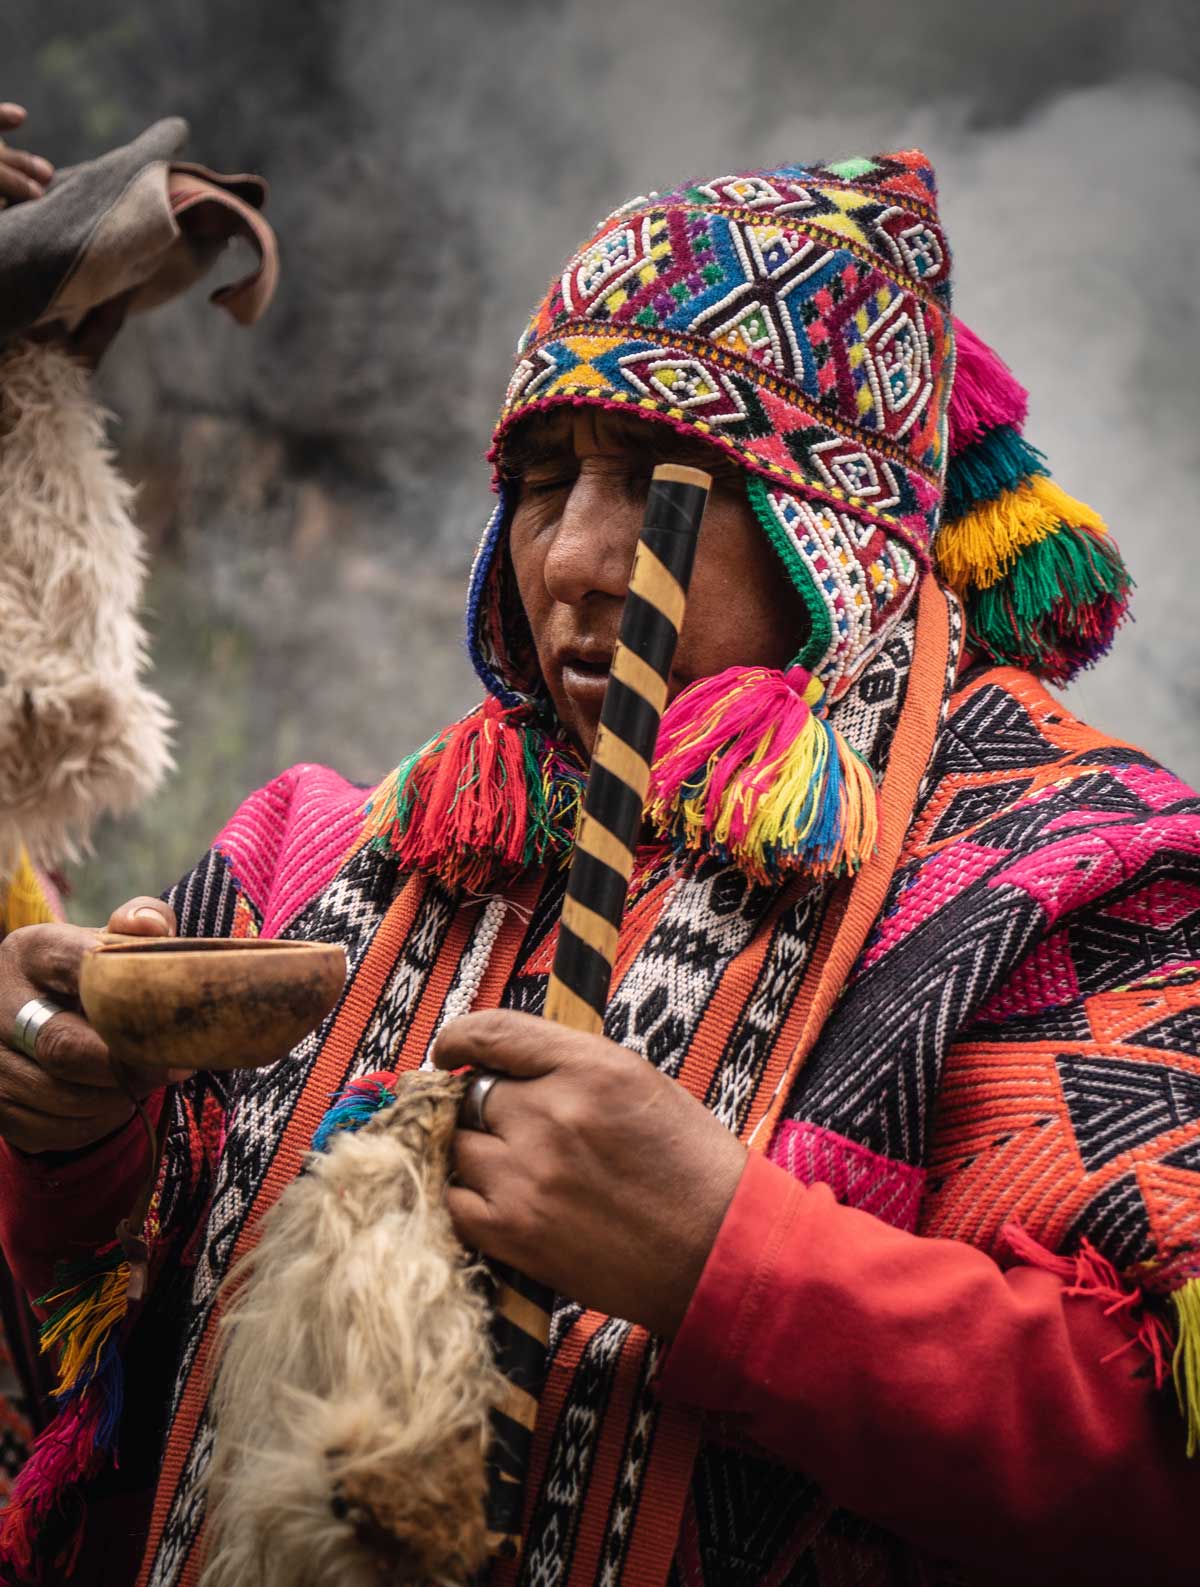 We are the incan qero shamans (photo by Walter Coraza)